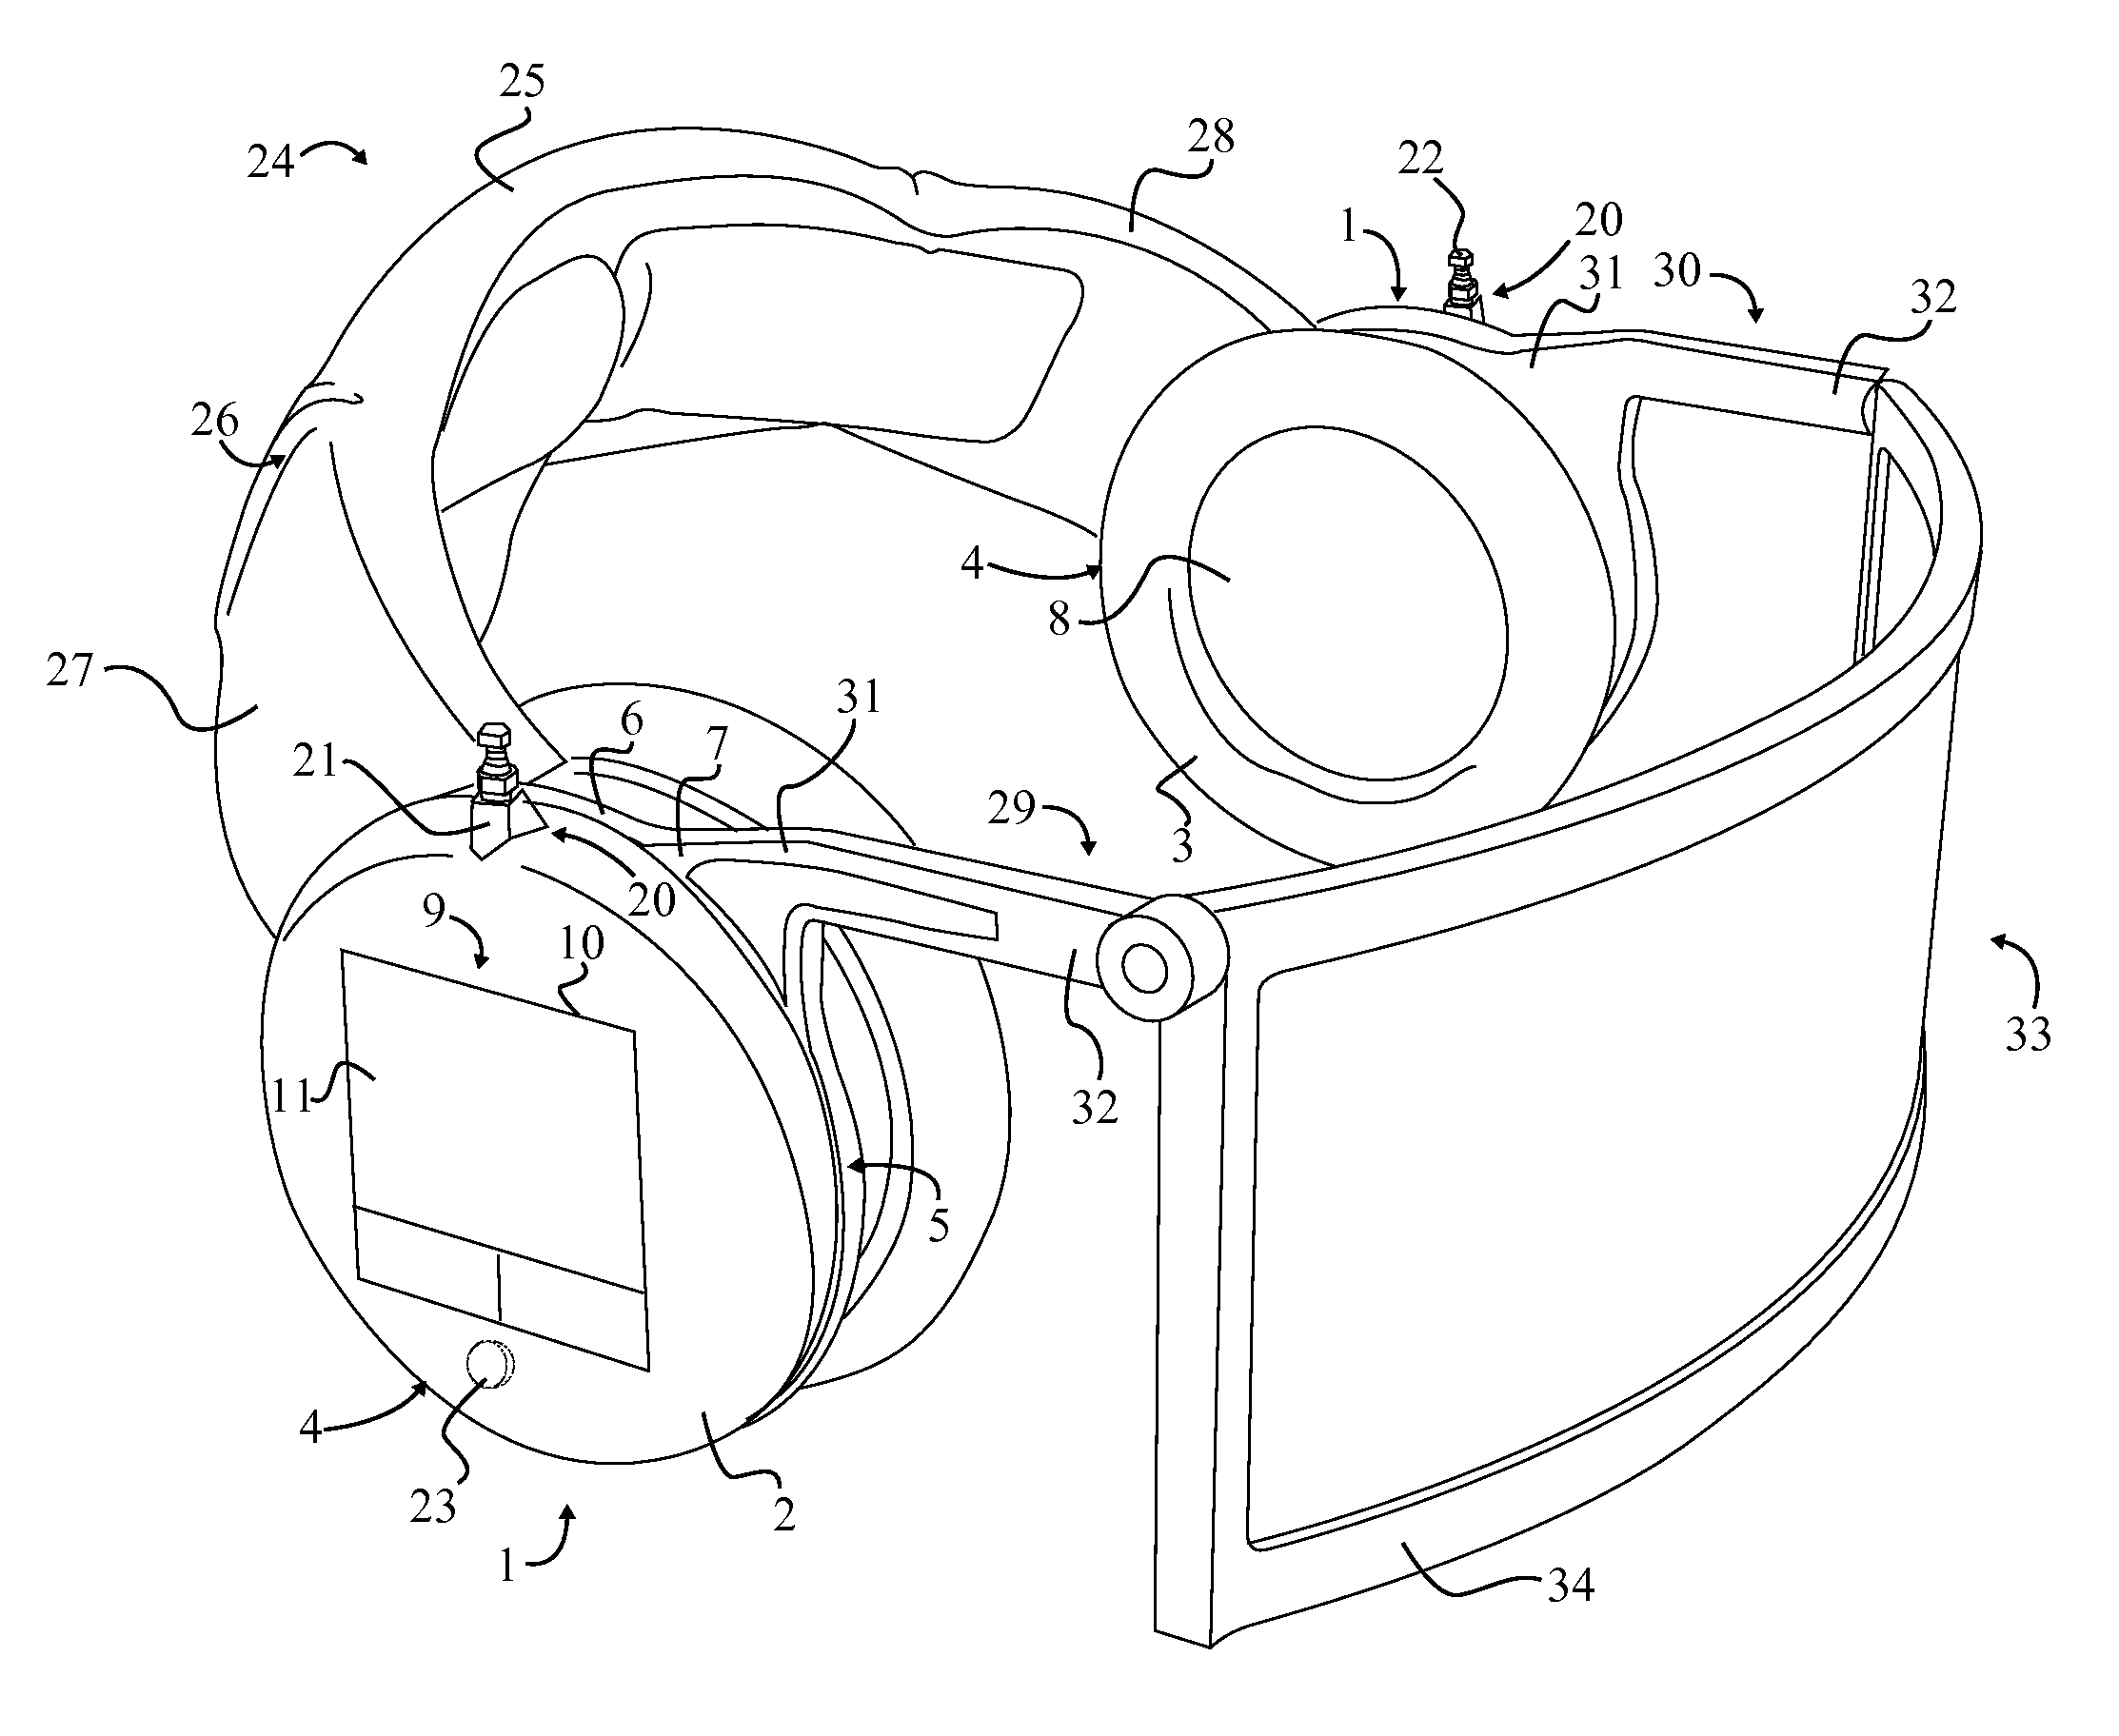 Headset with adjustable display and integrated computing system